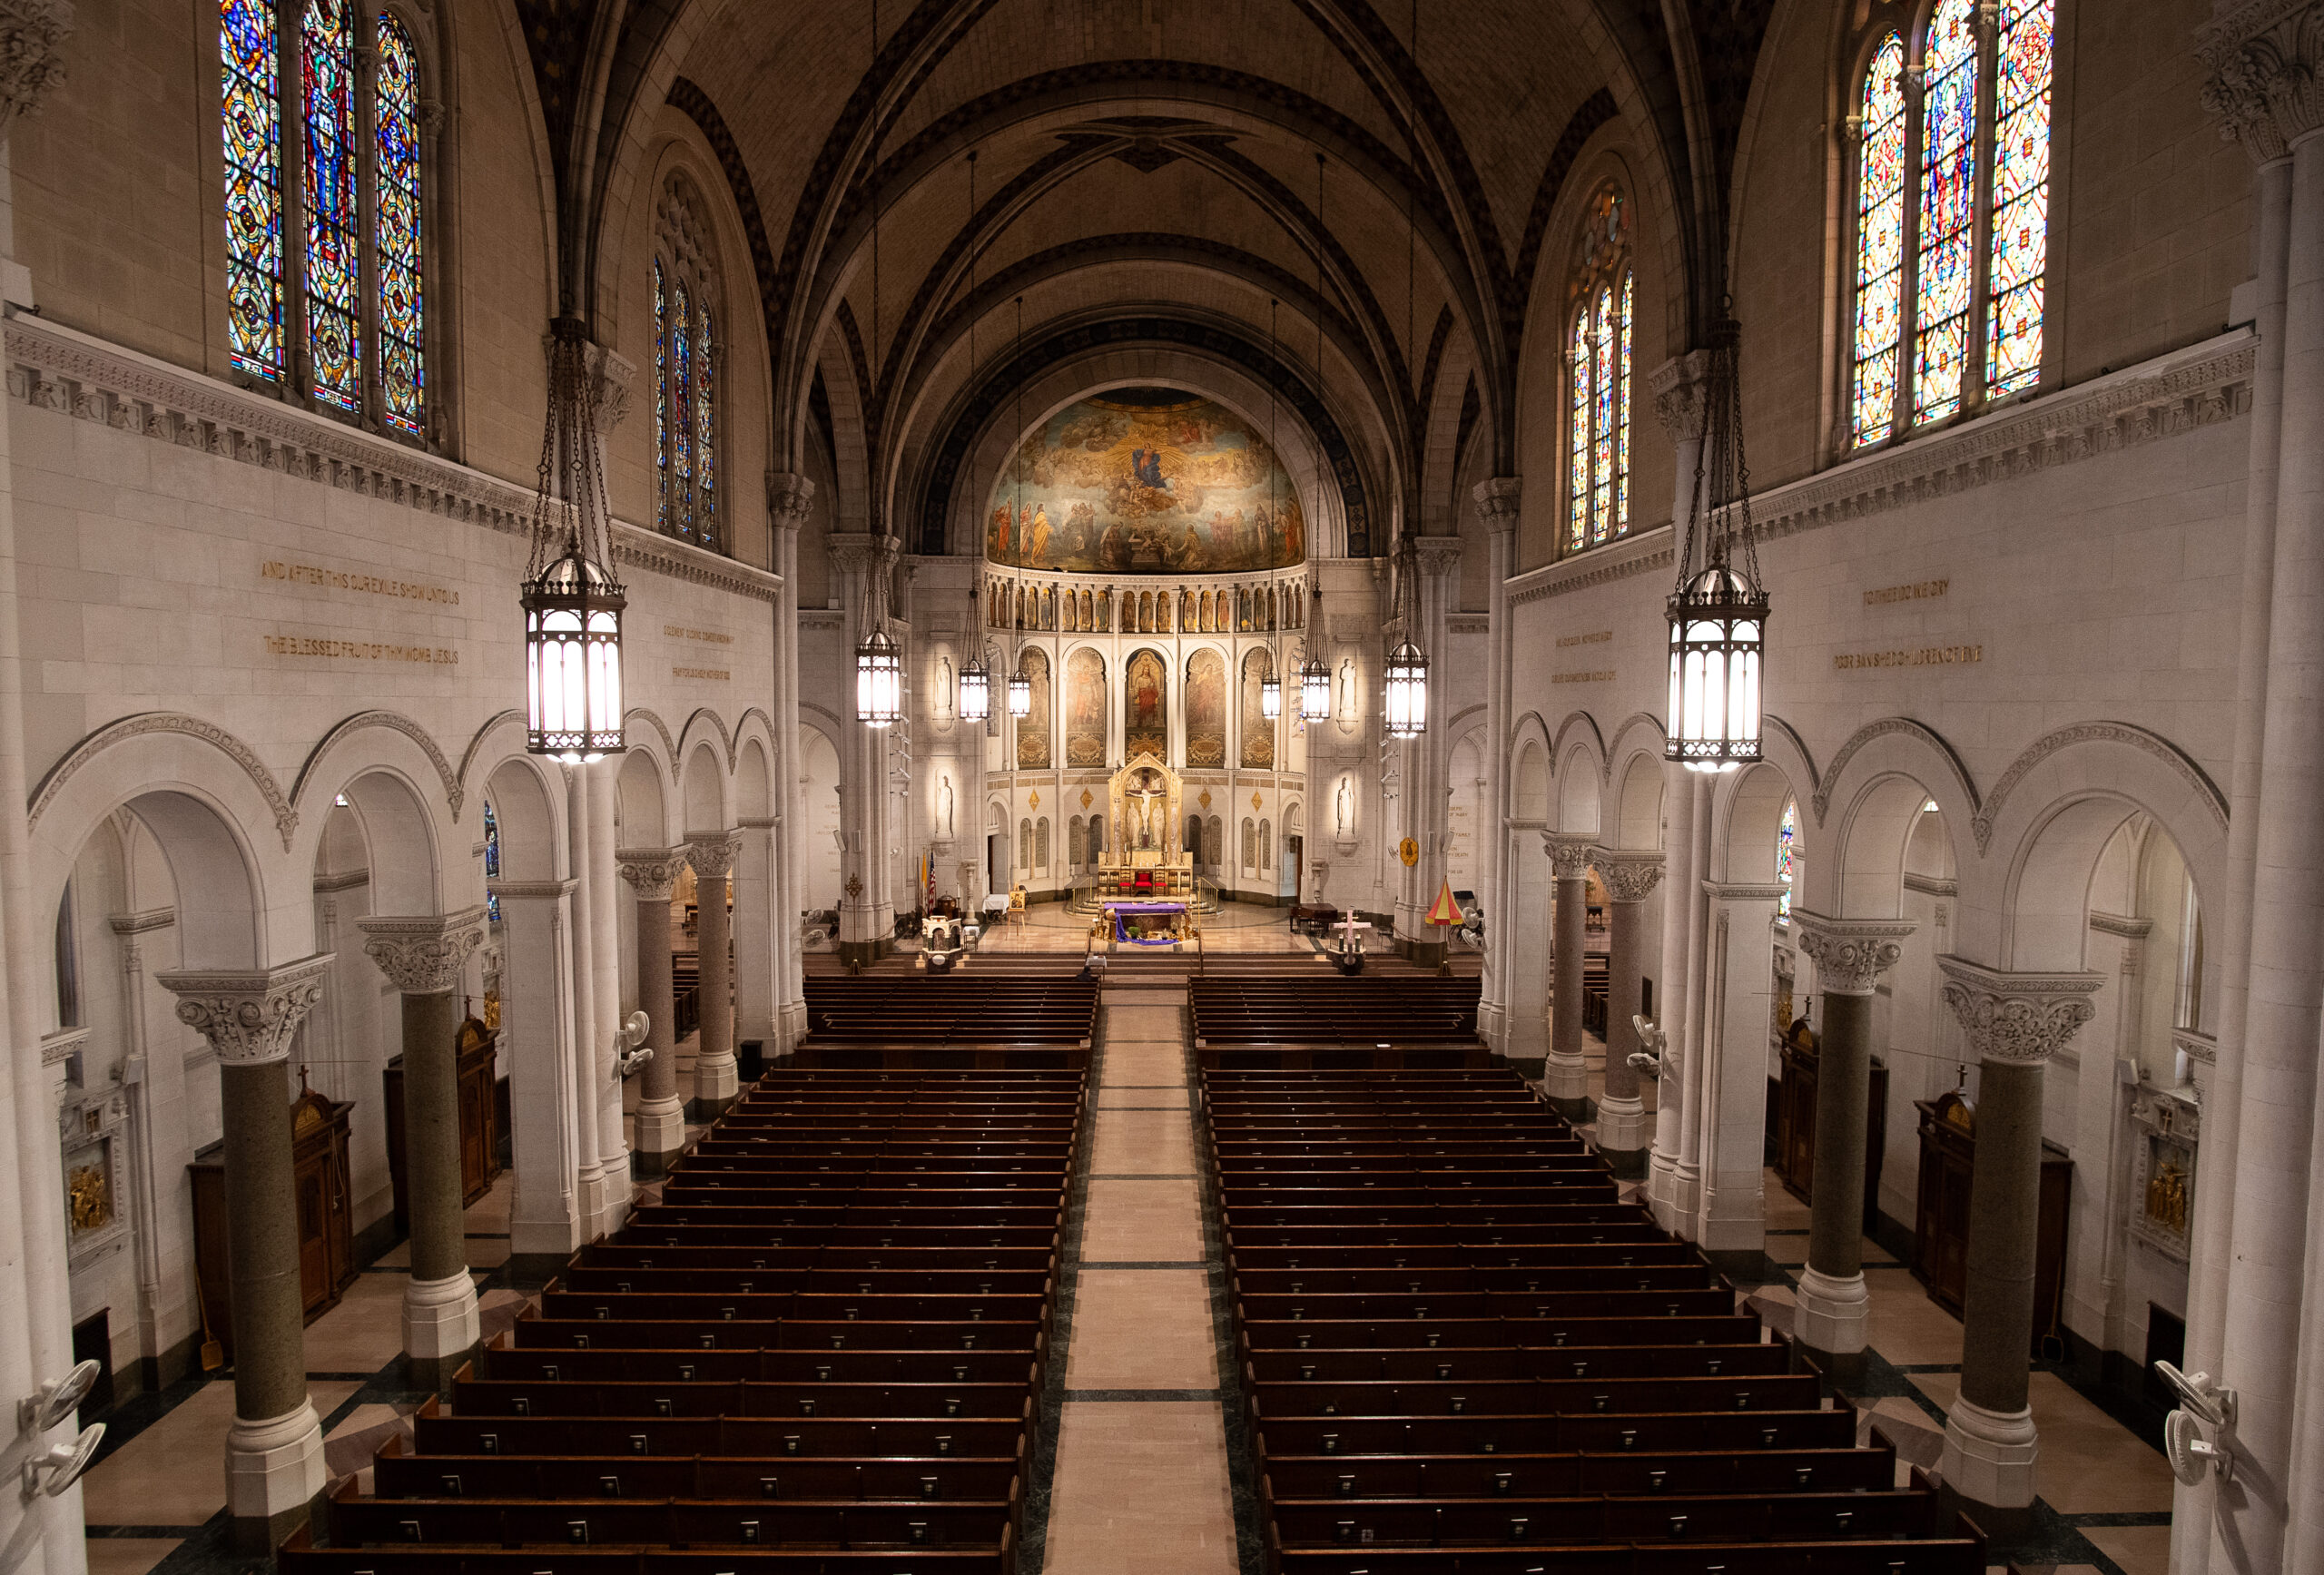 Interior view of a cathedral showcasing rows of pews leading to an ornate altar, stained glass windows, arches, and religious frescoes on the apse.